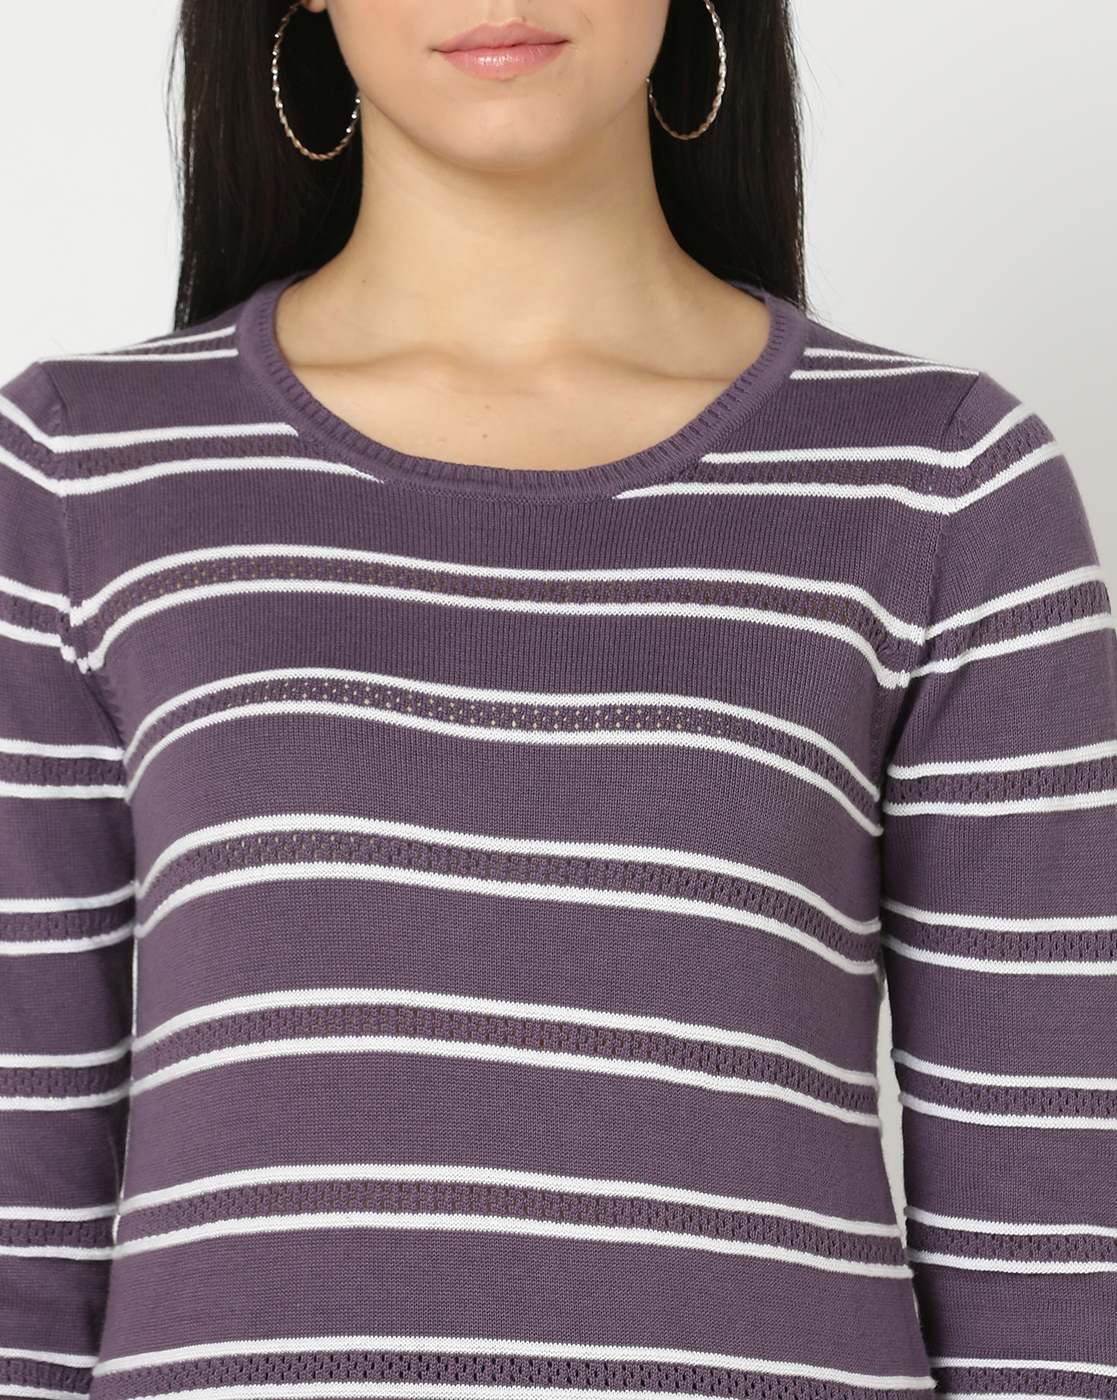 Buy Lavender Sweaters & Cardigans for Women by Fig Online